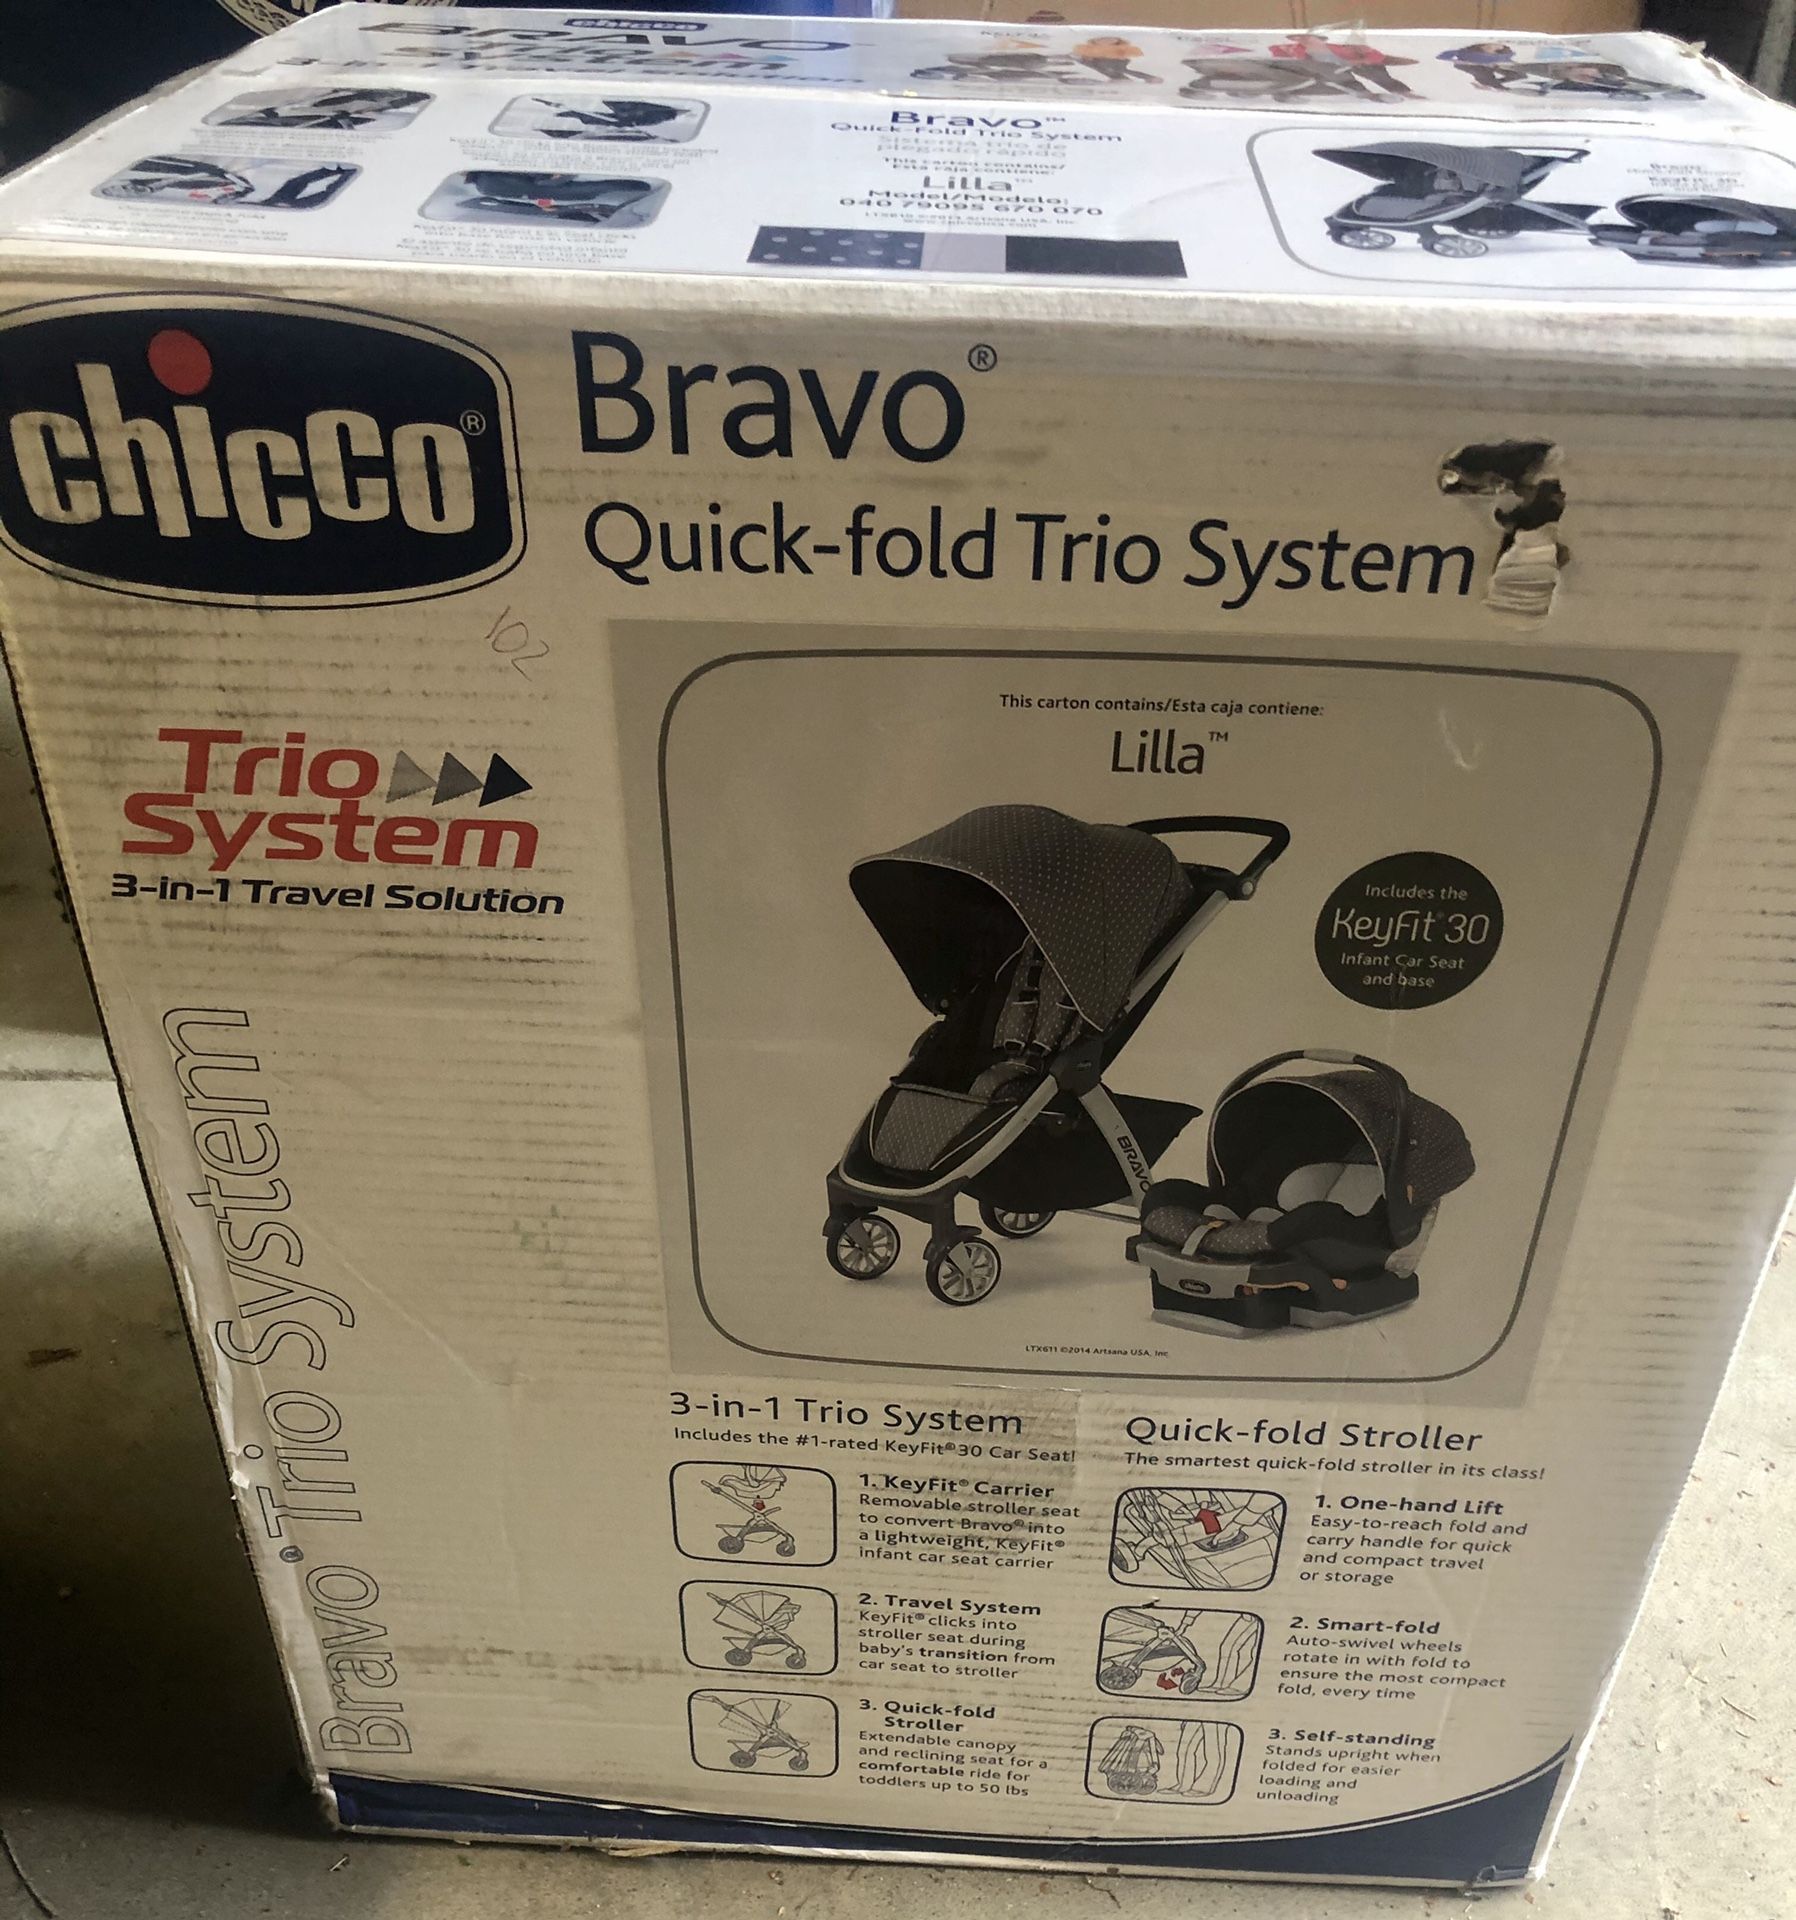 Chiccon Bravo Trio system car seat, base and stroller, Lilla color, NEVER OPENED BOX BRAND NEW